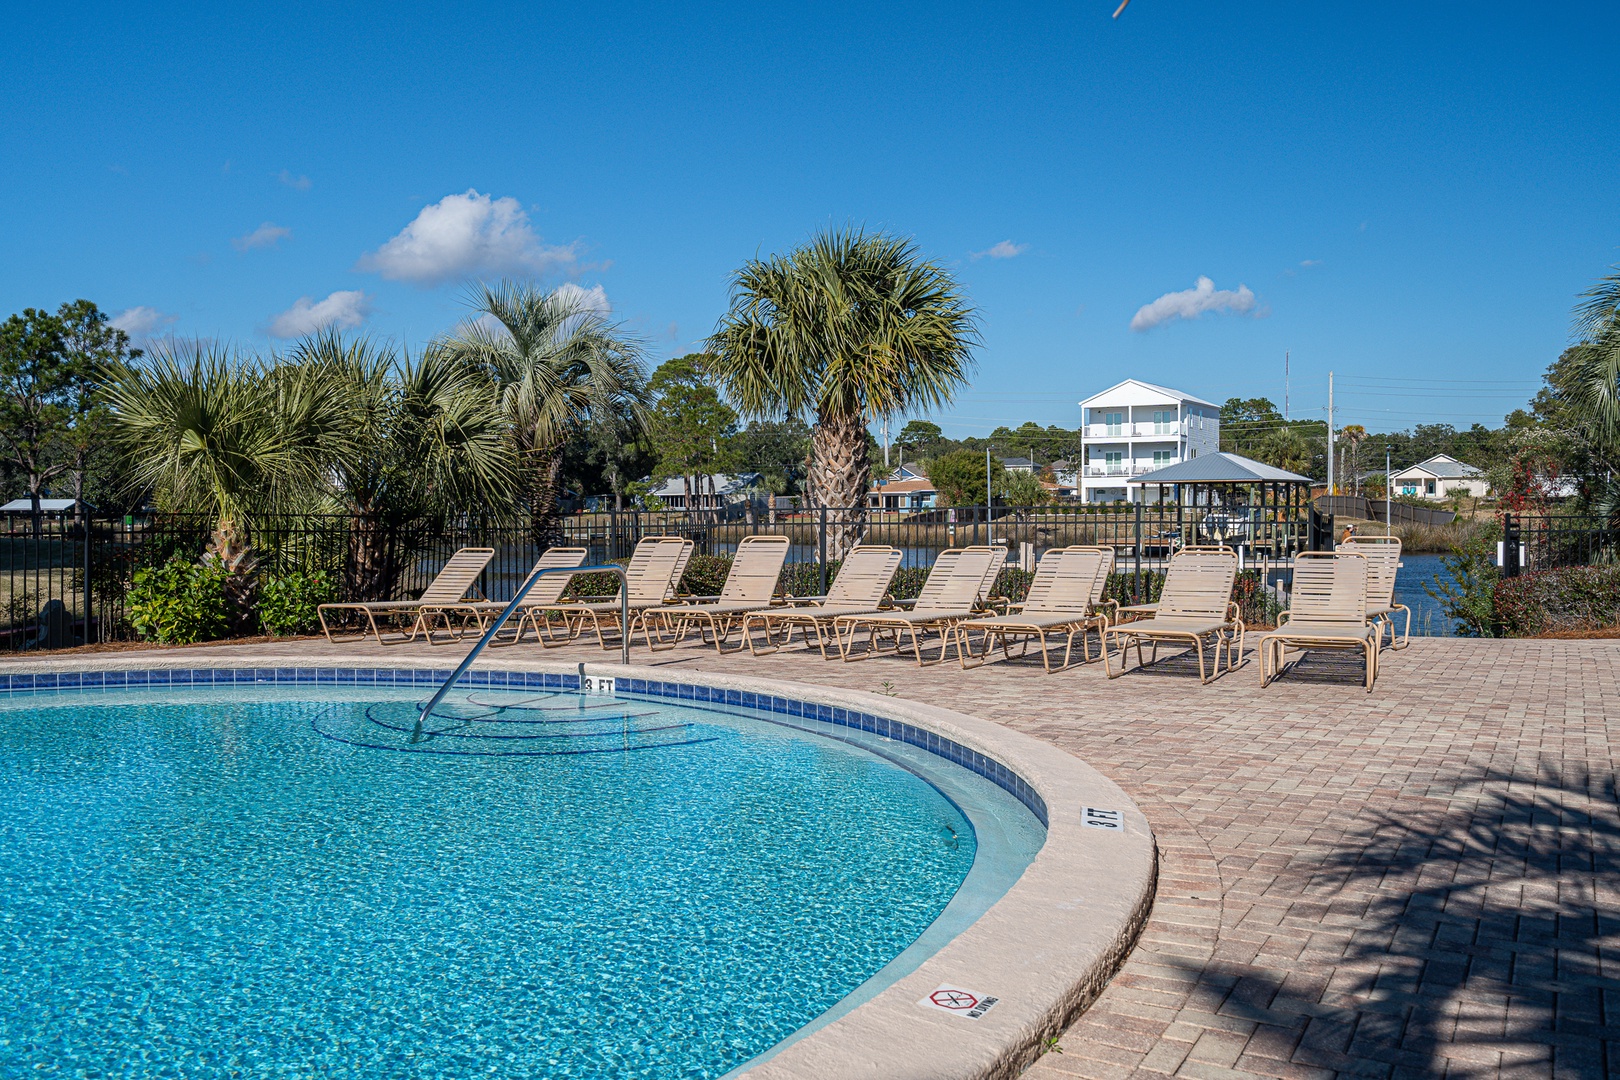 Lounge the day away or make a splash in the sparkling community pool!